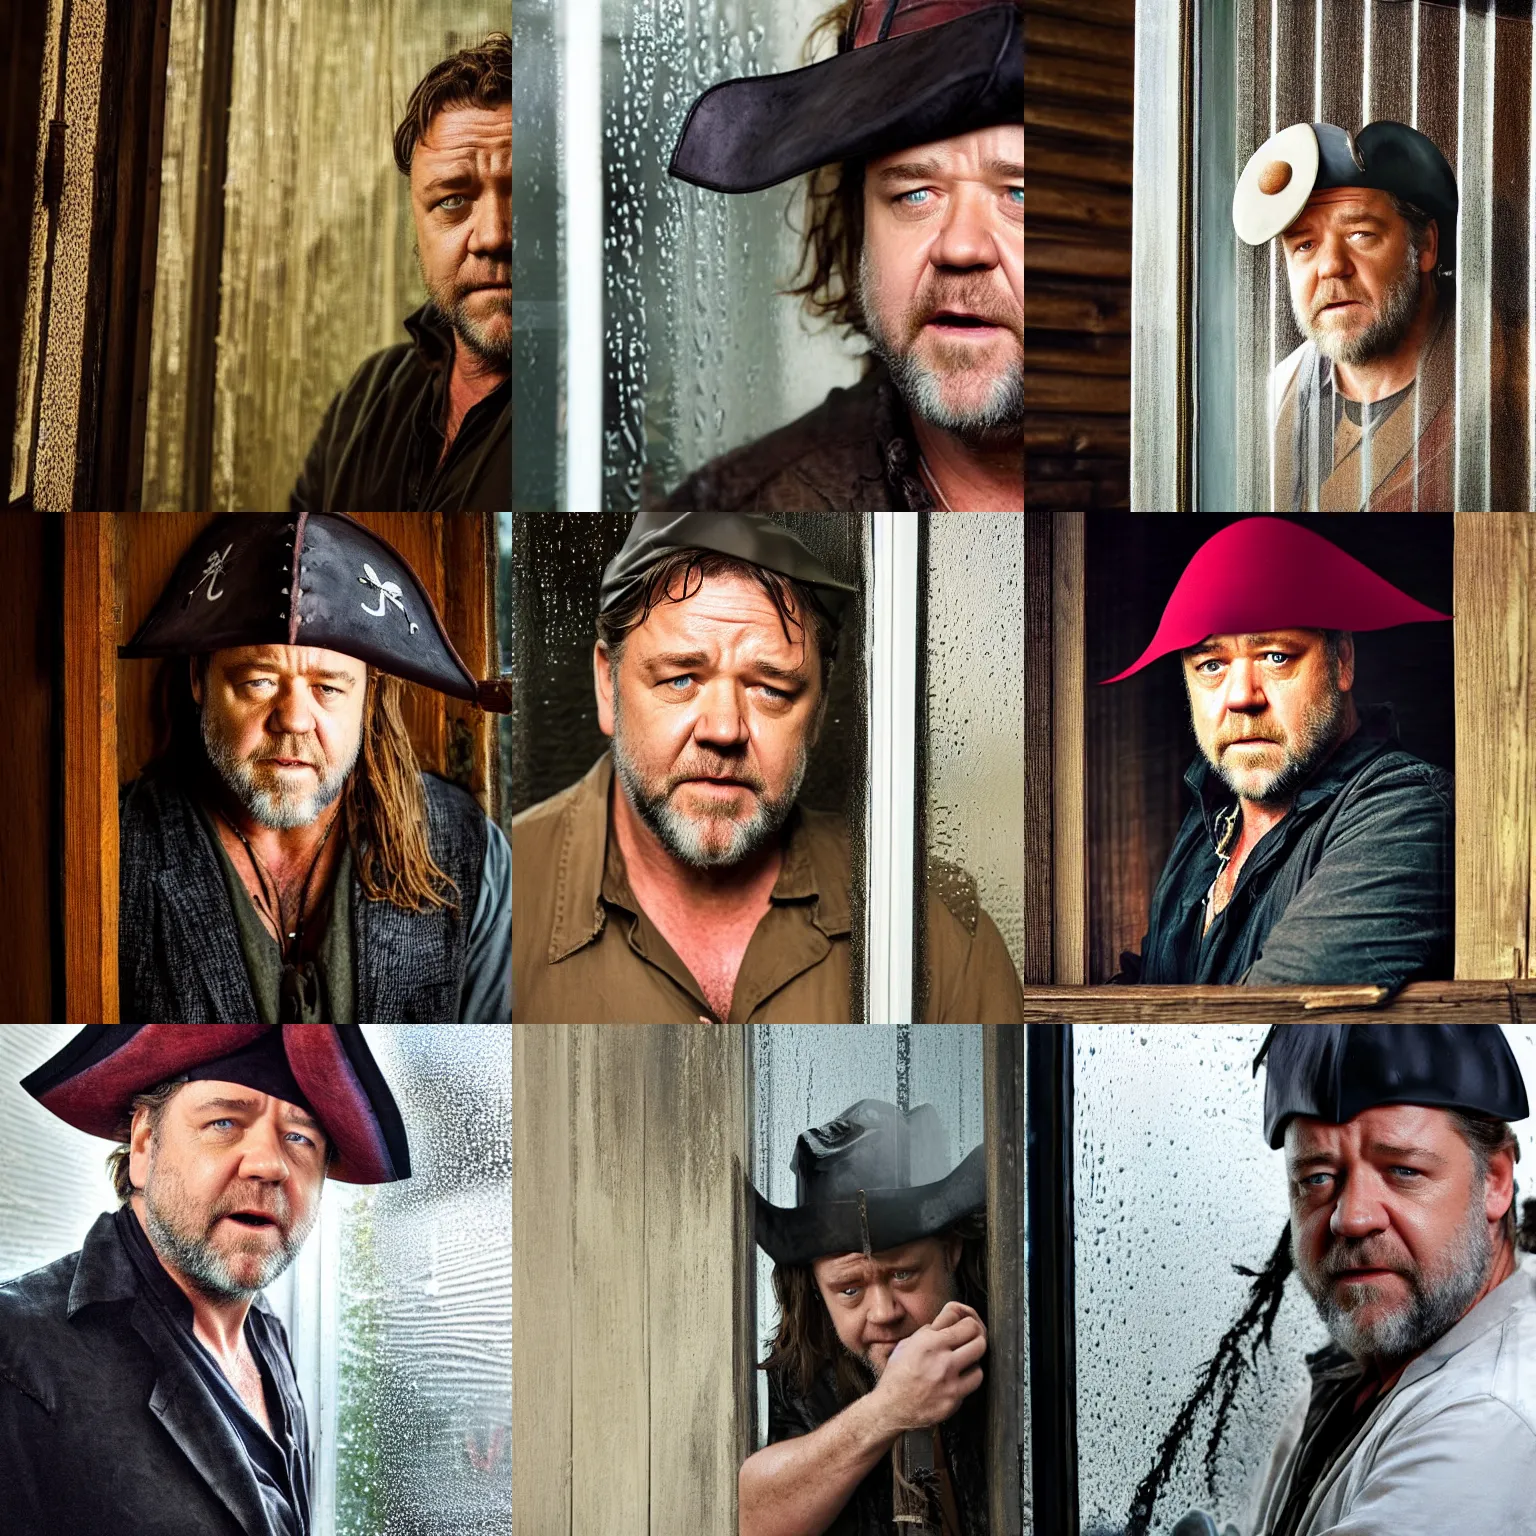 Prompt: russell crowe wearing a too wide silly pirate hat behind a rainy dirty window and wooden wall peering out to the camera